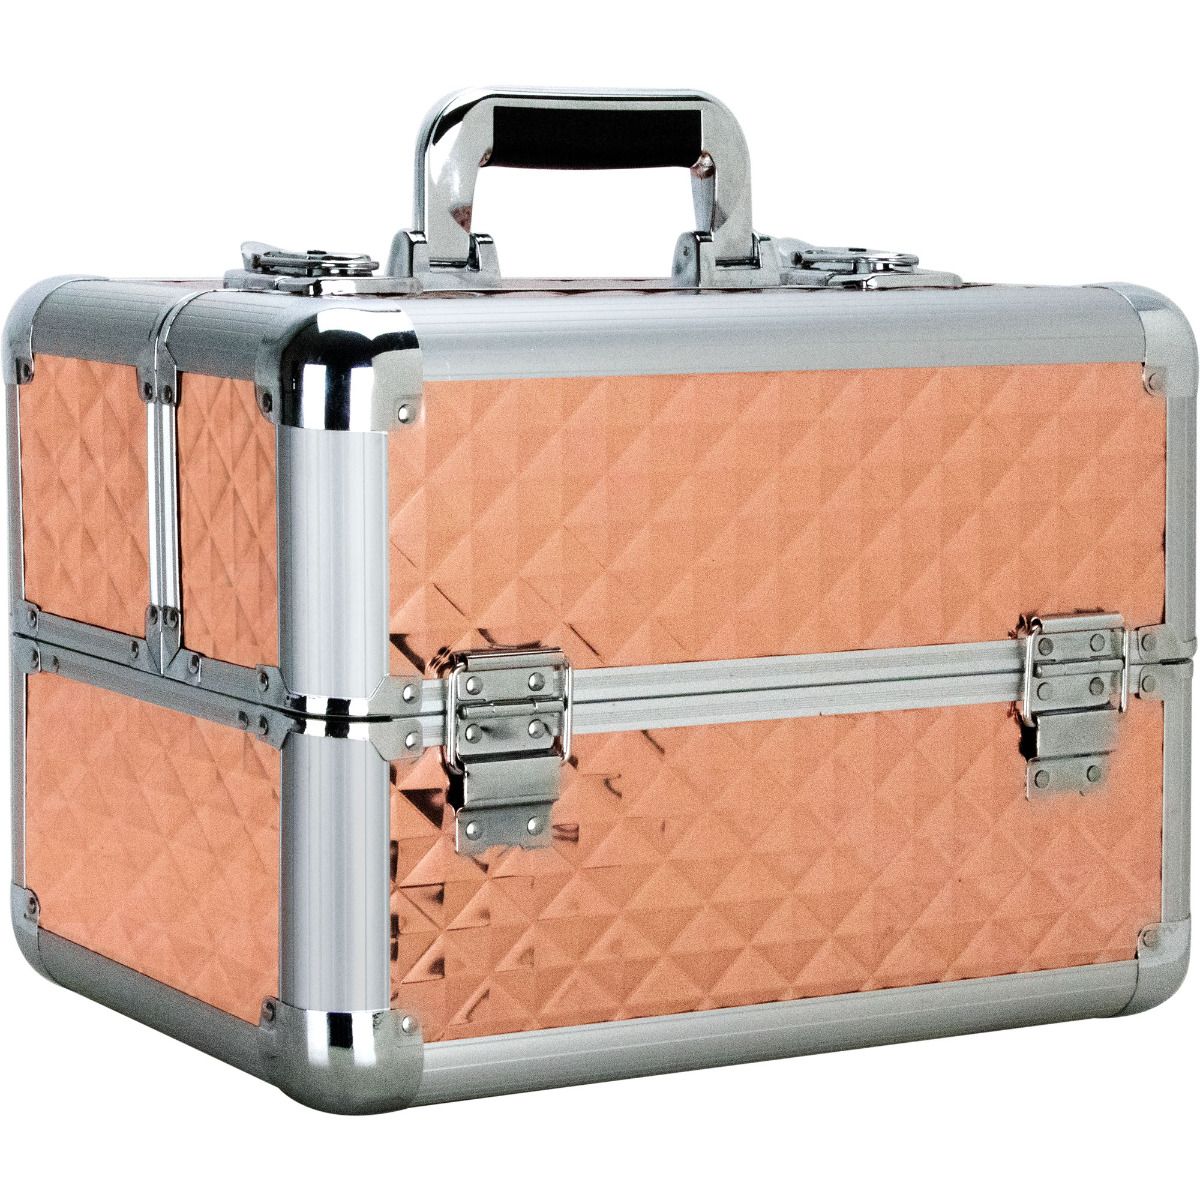 Vp007-85 4 Extendable Trays Professional Cosmetic Makeup Case With Dividers, Rose Gold Diamond